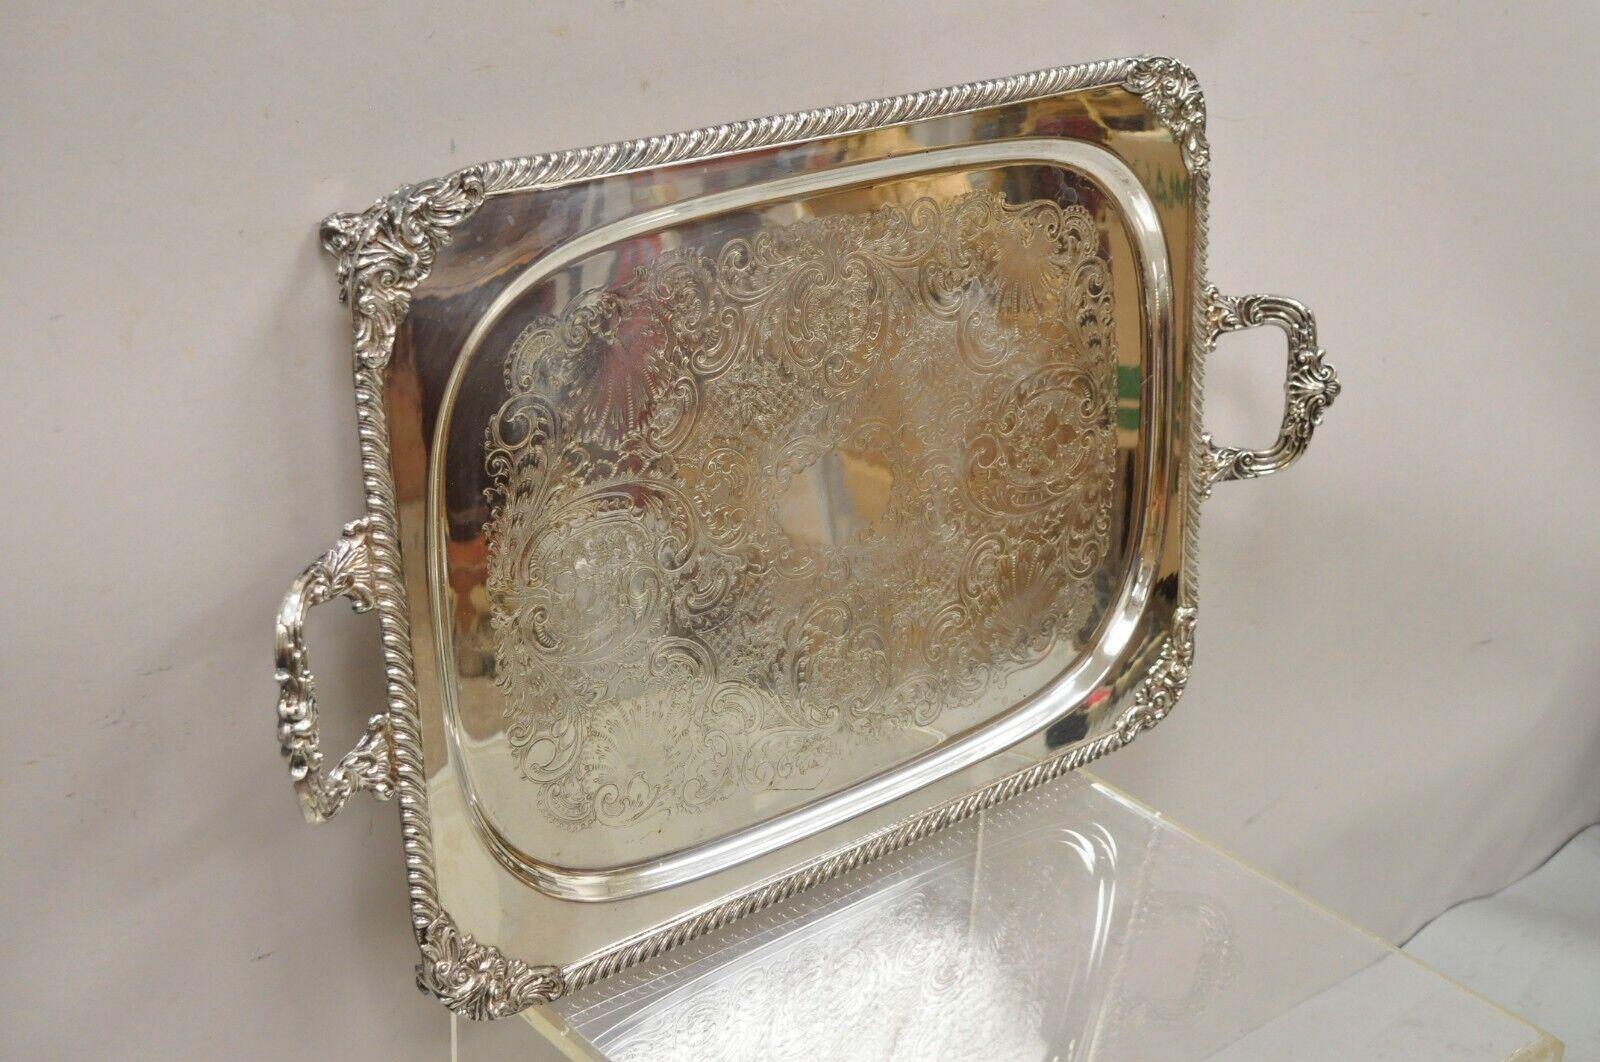 20th Century Ornate English Victorian Twin Handle Heavy Silver Plate Platter Tray For Sale